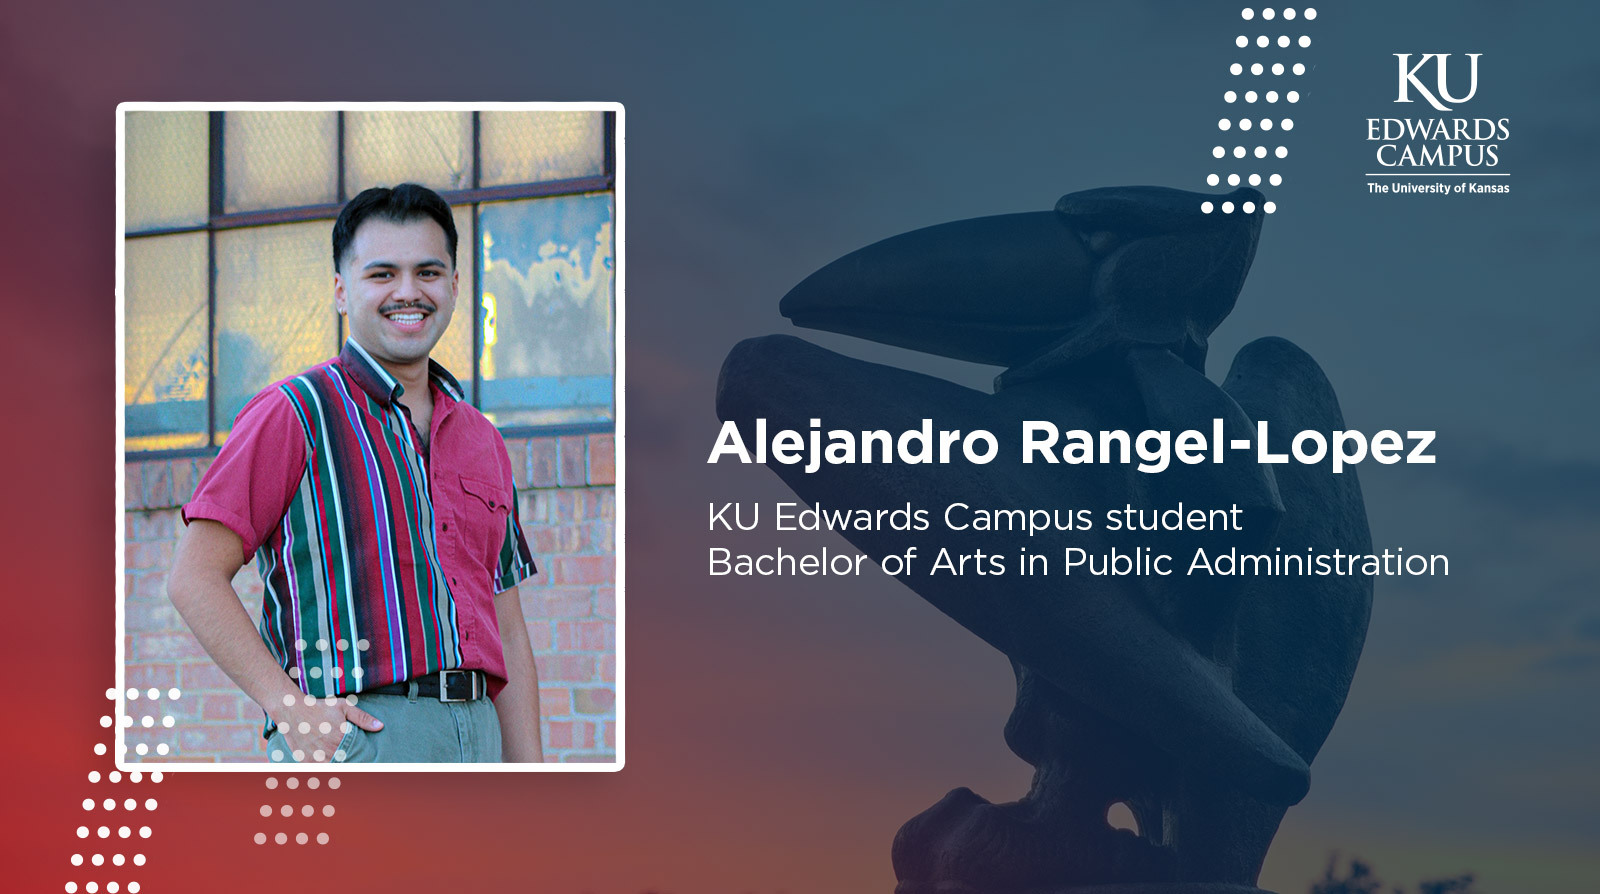 Rising up at KUEC: In this Q&A series, outstanding KU alumni share how the KU Edwards Campus helped them start, advance, or change their career. Meet Alejandro Rangel-Lopez.